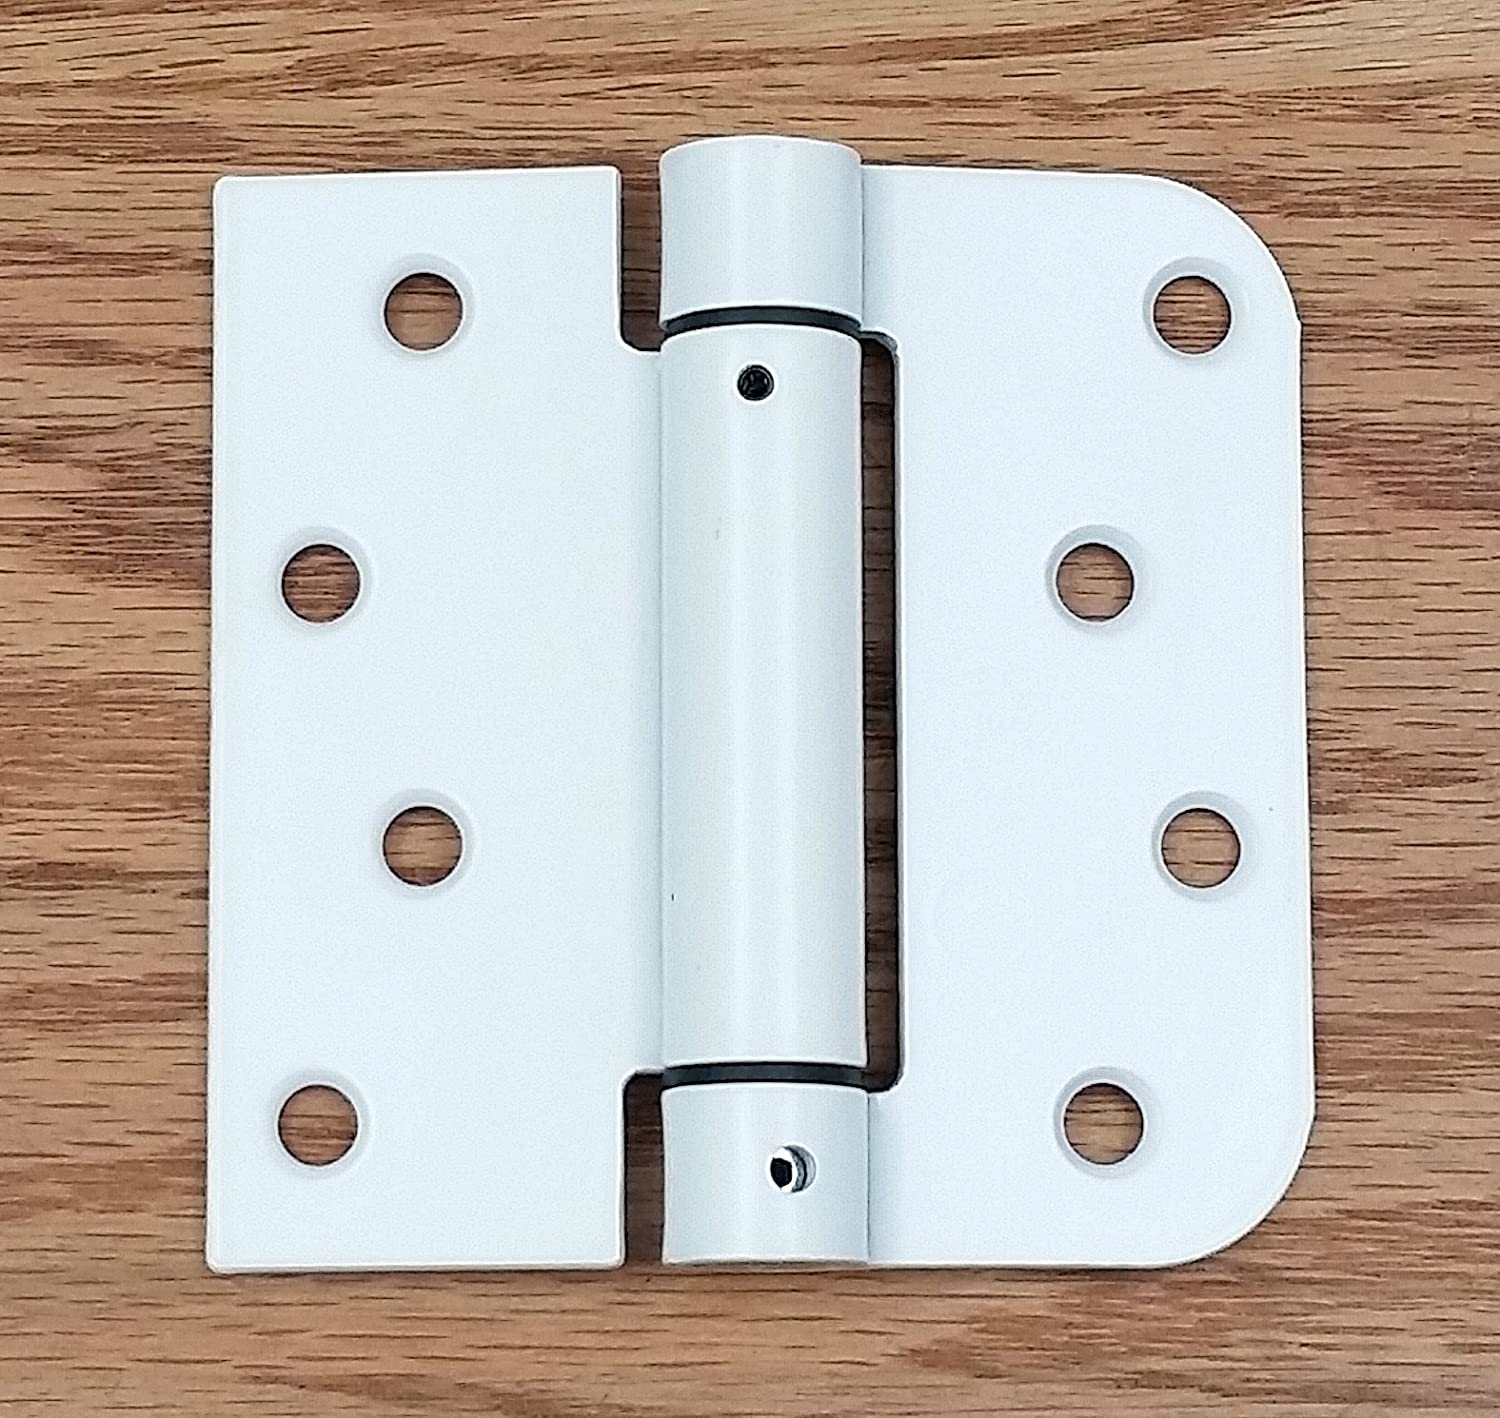 Spring Self-Closing Hinges, 4" X 4" Square with 5/8" White Prime - 2 Pack - Adjustable Door Closing - image 2 of 2